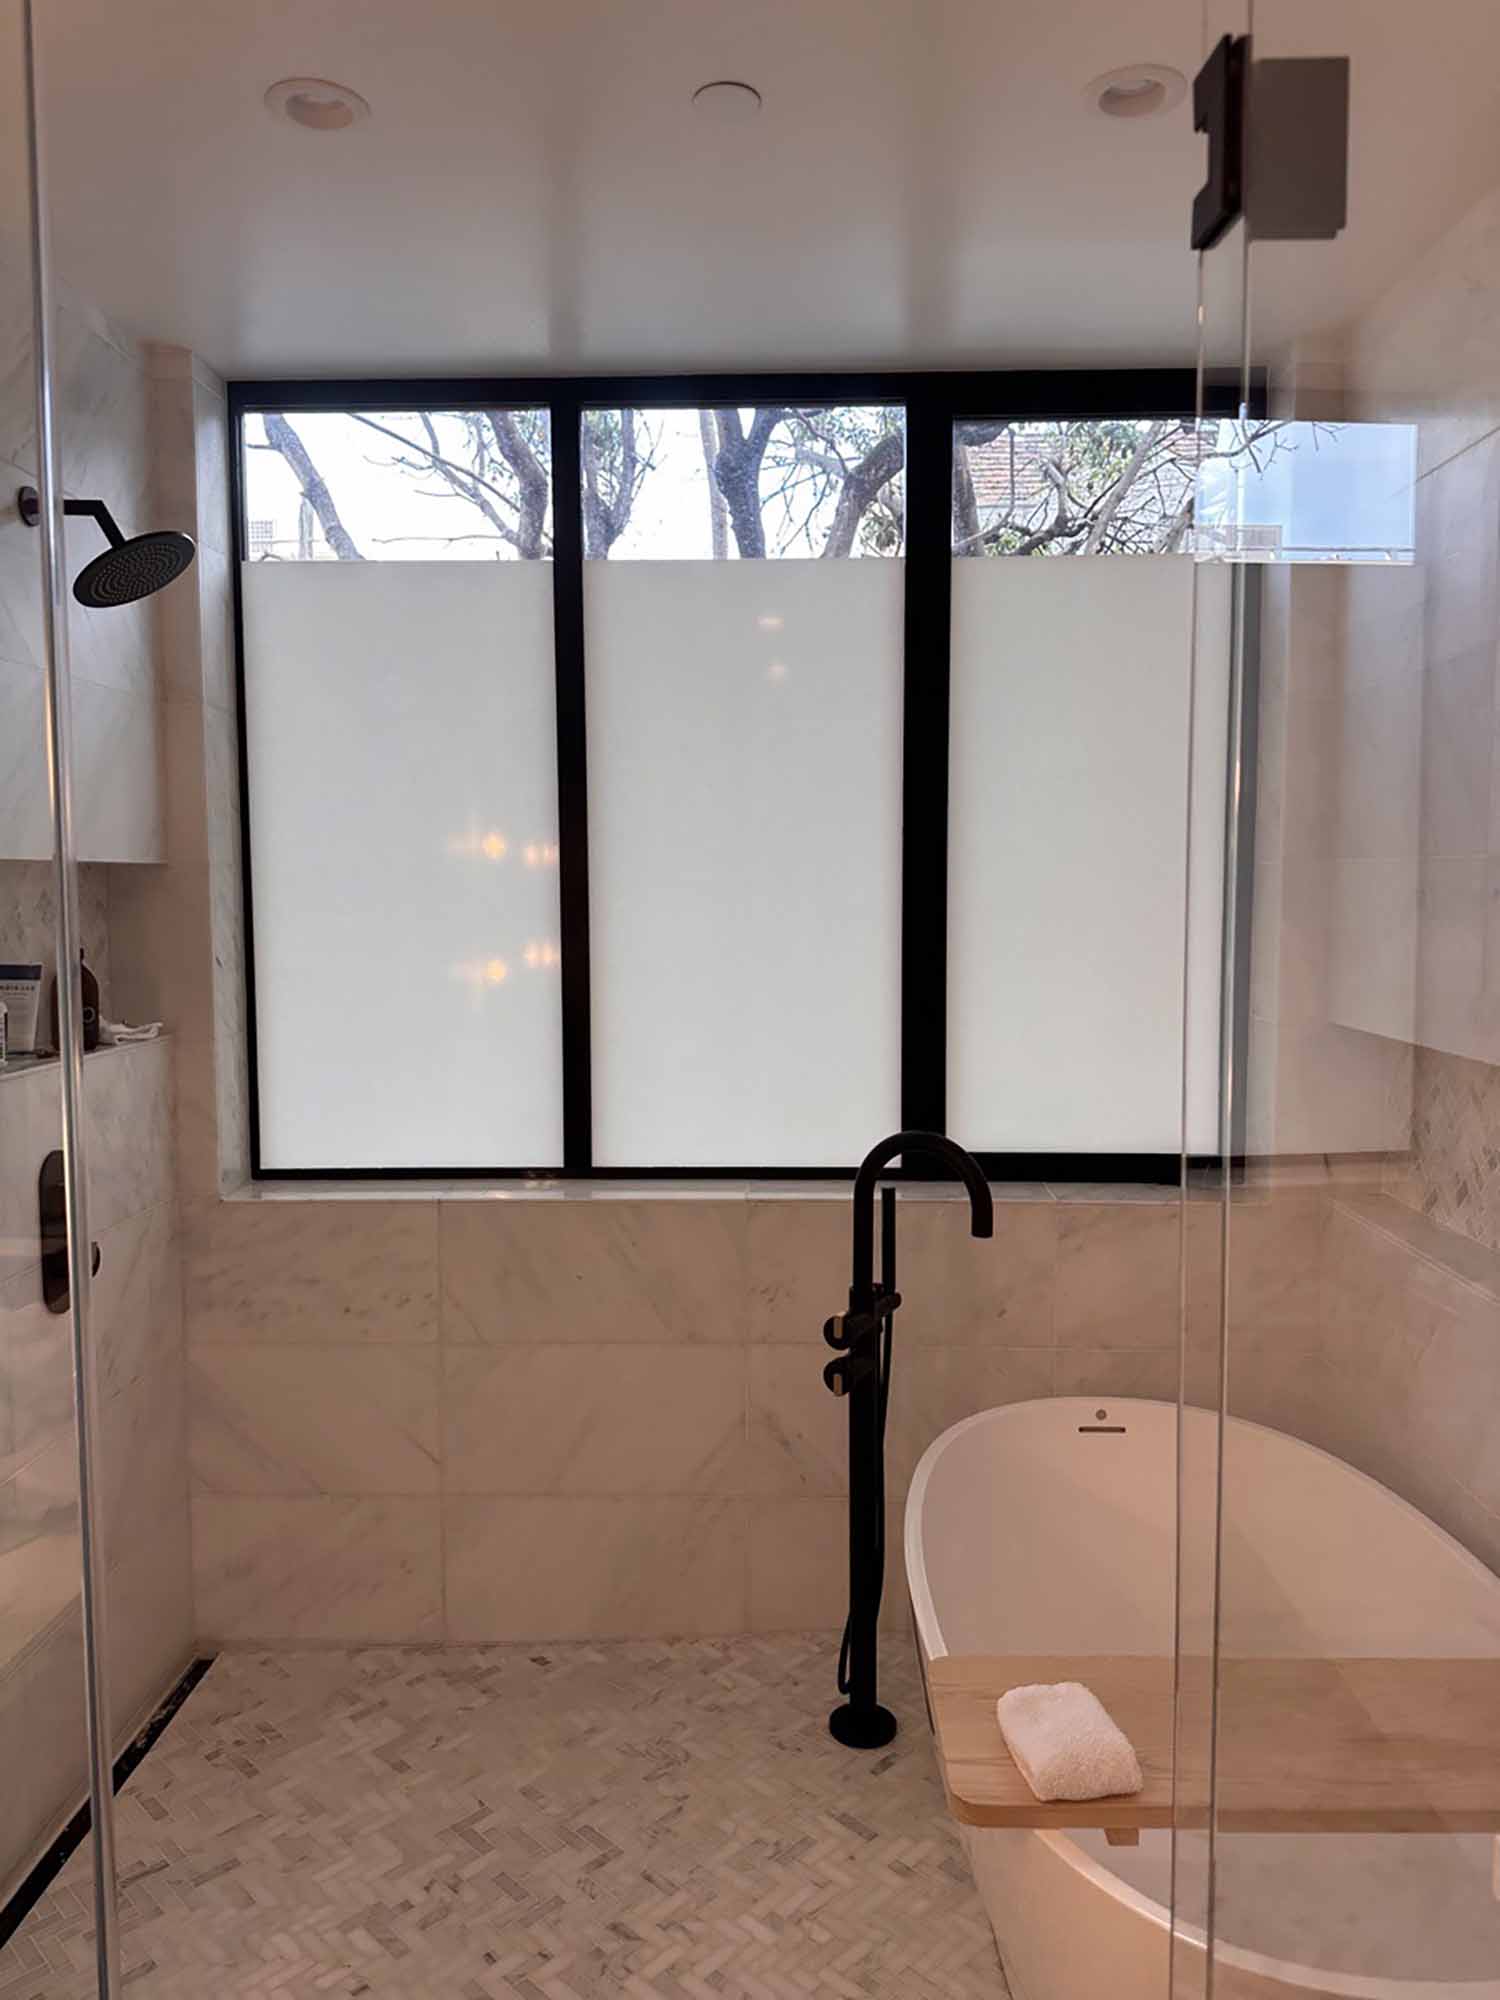 5 Bathrooms Transformed with 3M Privacy and Sun Control Window Film. Installed by ClimatePro in the San Francisco Bay Area.